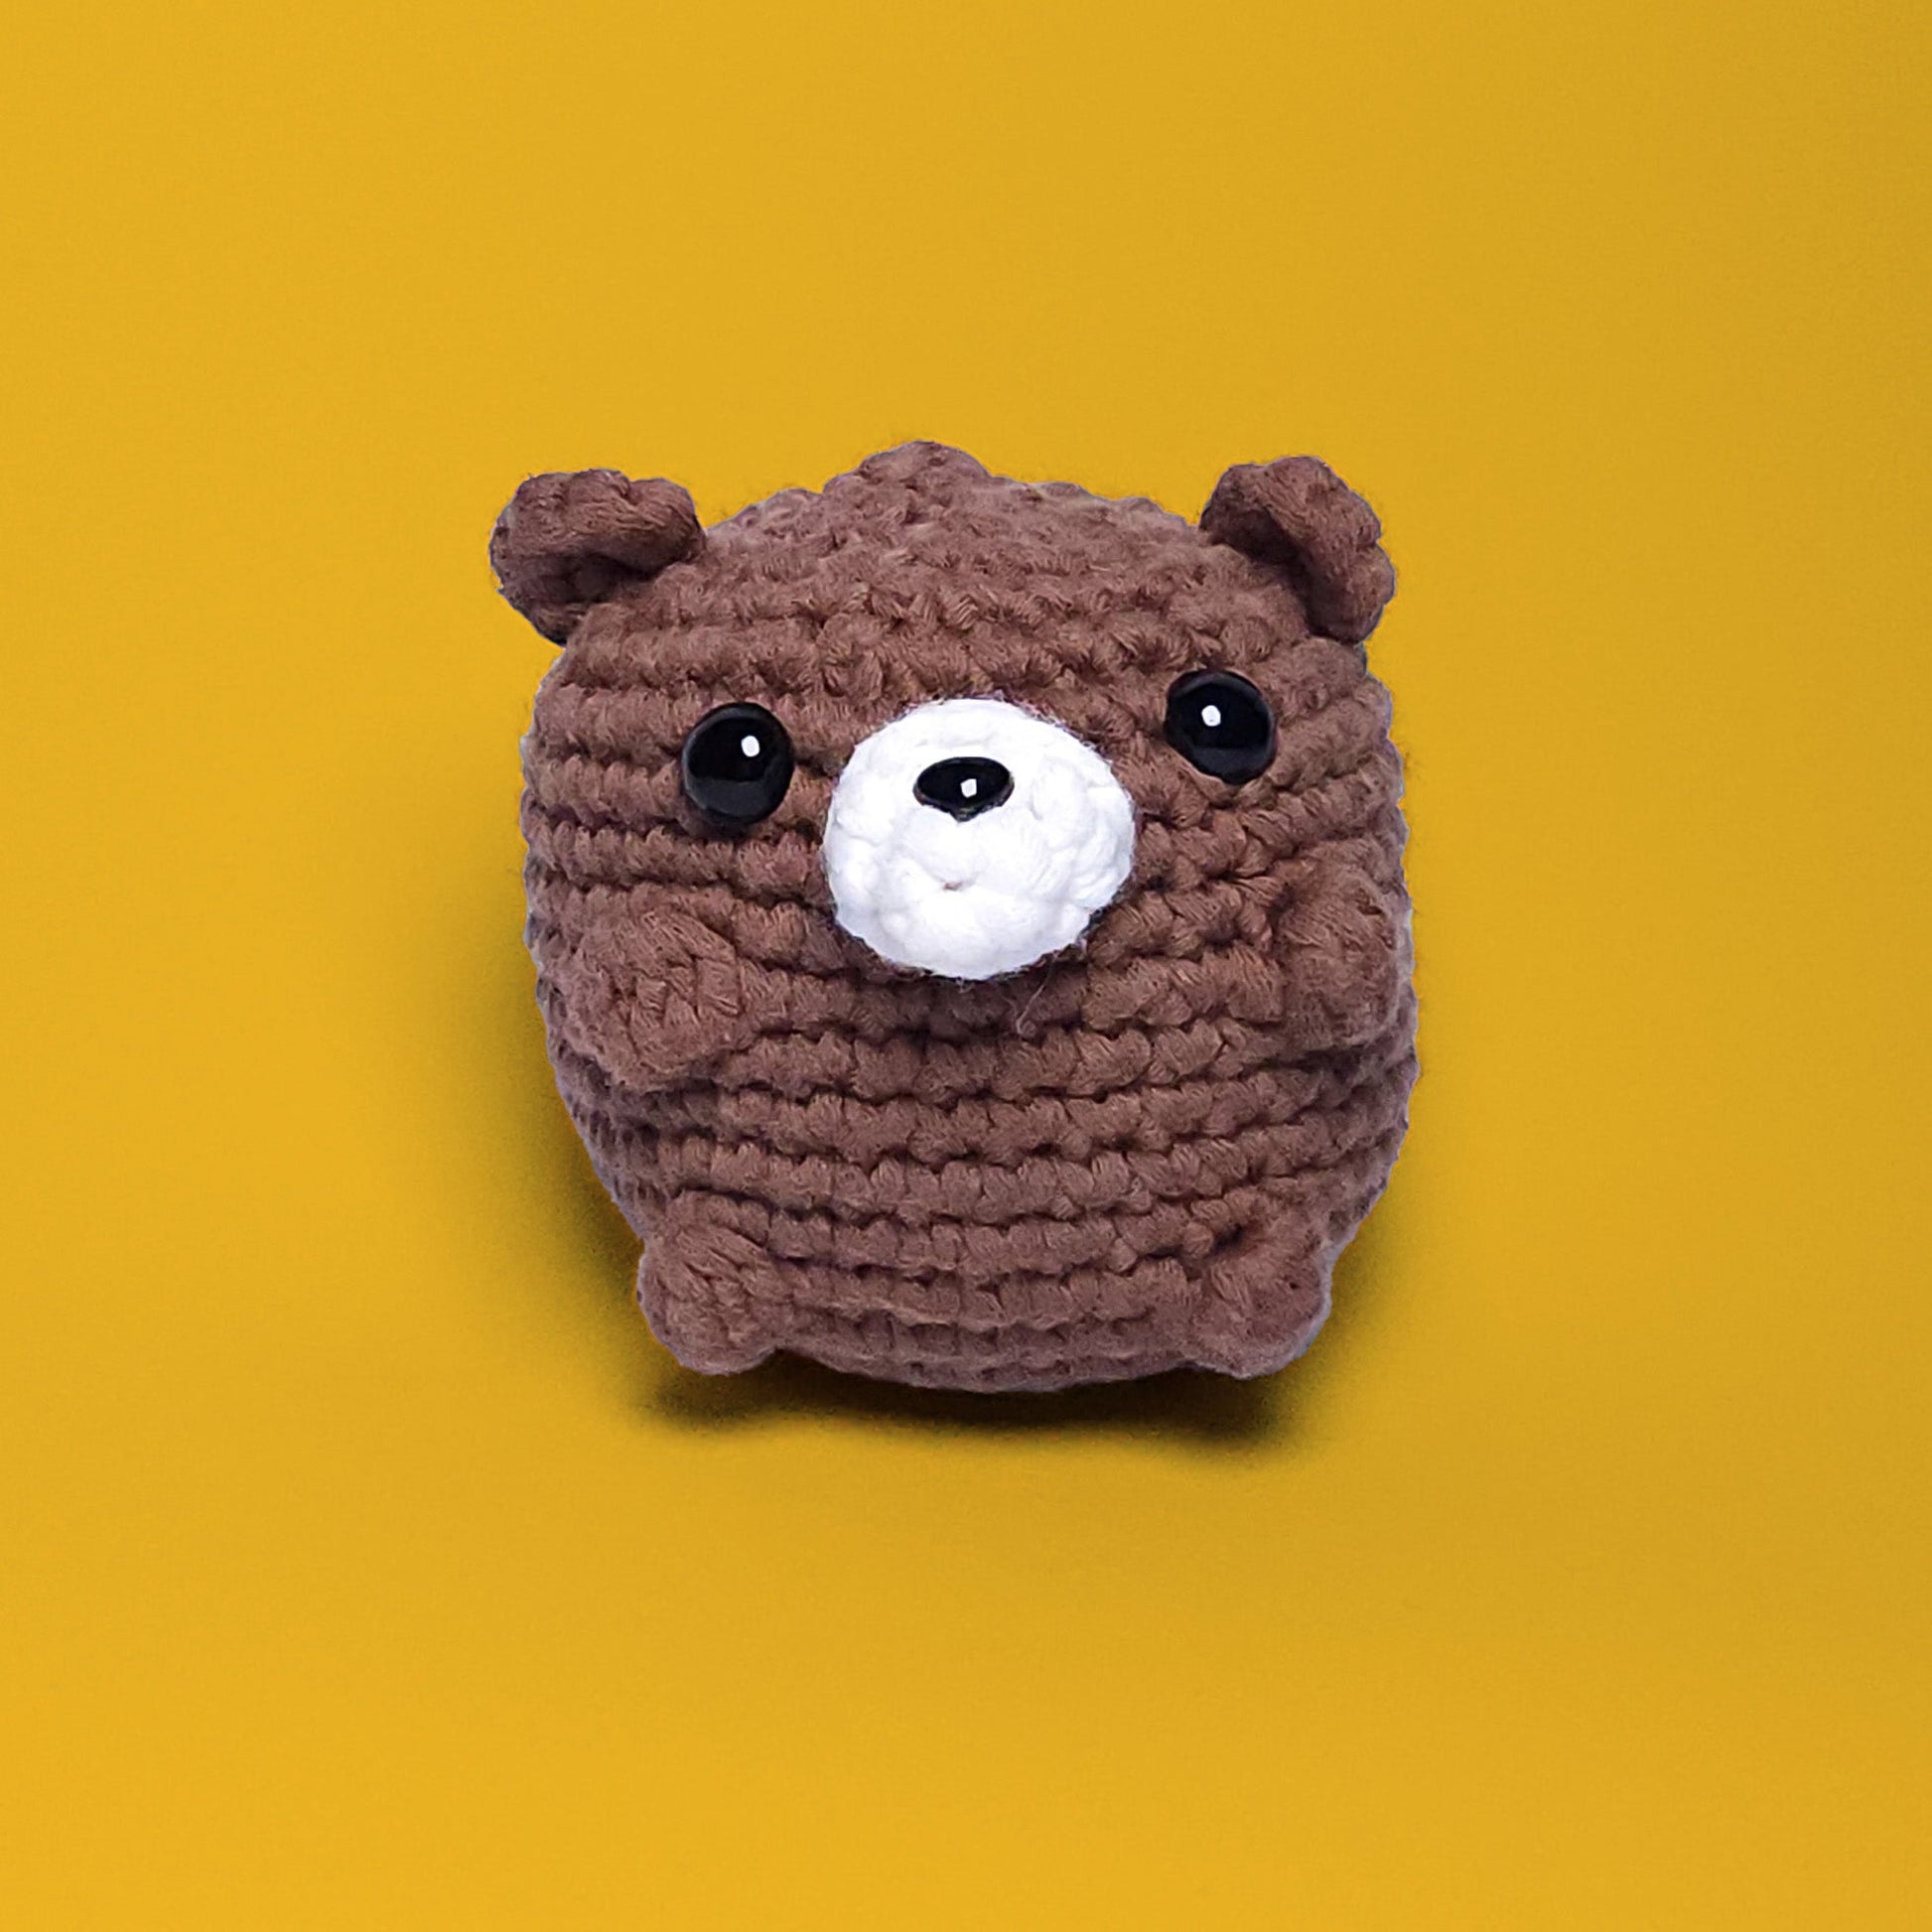 Brown bear crochet amigurumi, a completed project from our beginner-friendly crochet kit. Handmade with our yarn, perfect for people who are looking to learn crocheting. Front view.